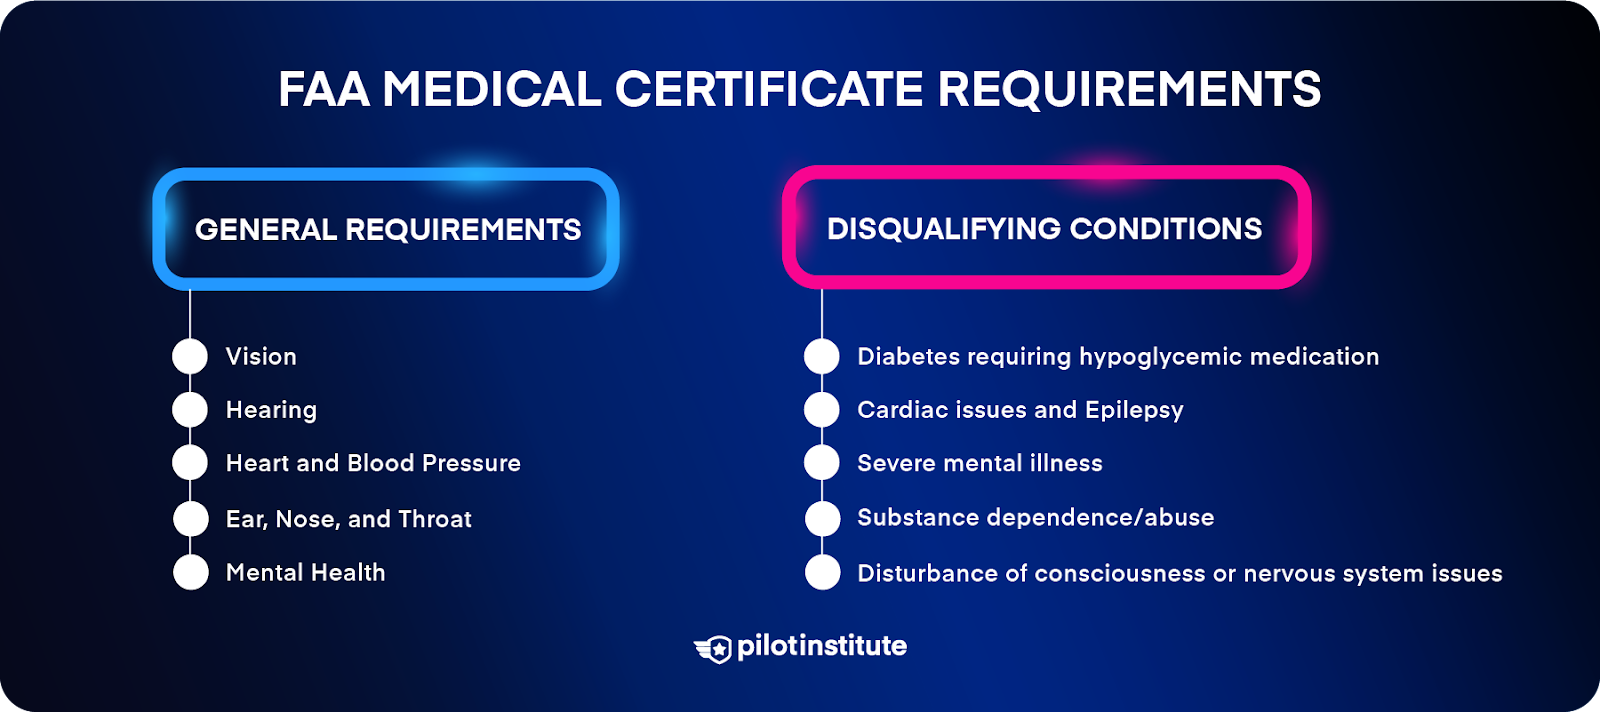 FAA Medical Certificate Requirements infographic. Depicts the general requirements and disqualifying conditions related to obtaining an FAA medical certificate.